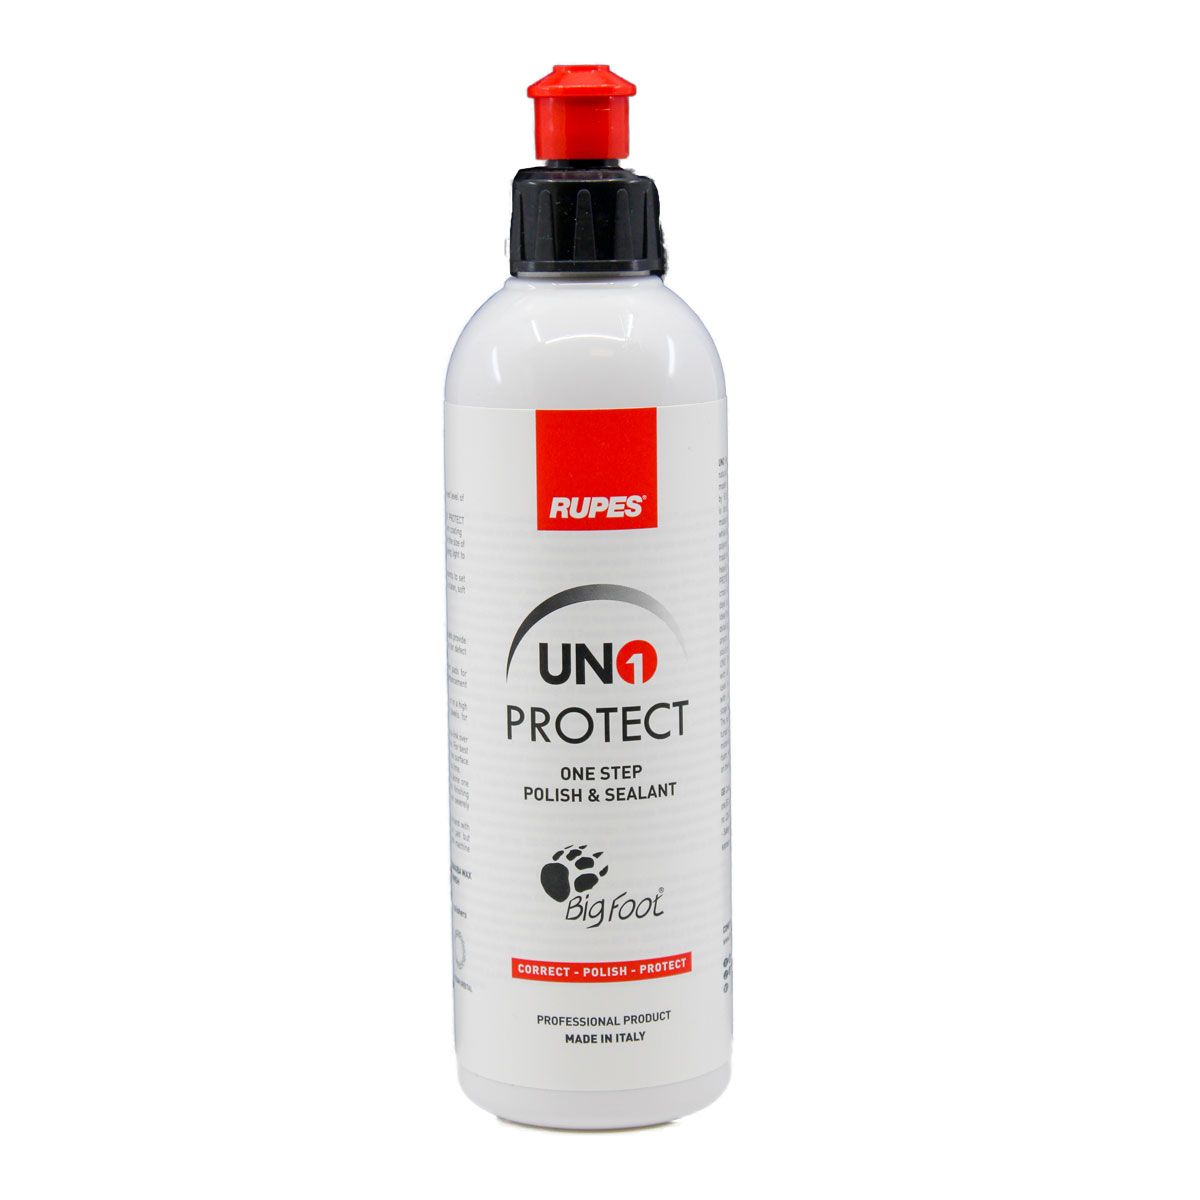 RUPES UNO PROTECT - ALL-IN-ONE POLISH & SEALANT